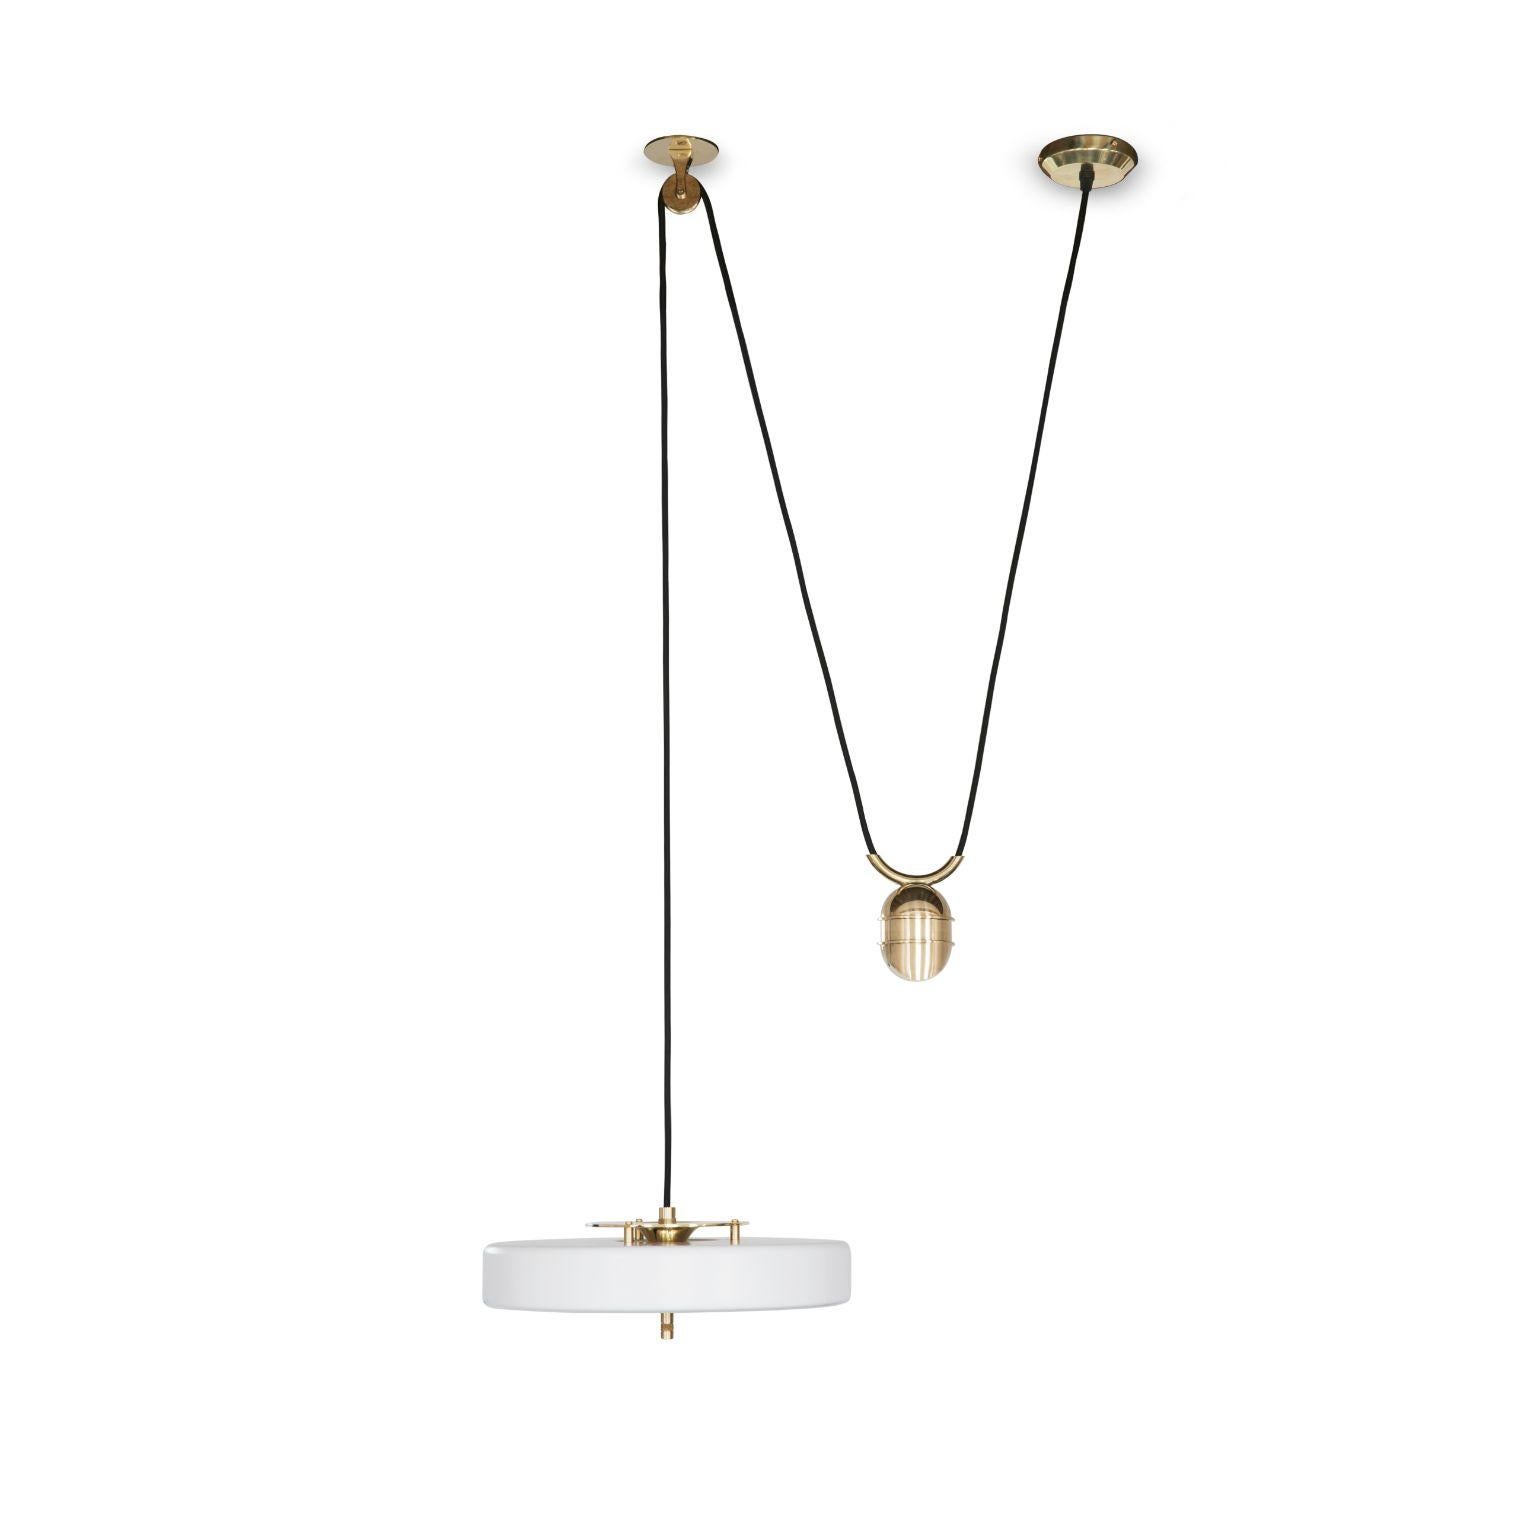 Revolve rise and fall pendant light - polished brass - White by Bert Frank
Dimensions: 30 x 35 x 11 cm, small lamp: 7.6 cm
Materials: Brass, steel

Also available in brushed brass
When Adam Yeats and Robbie Llewellyn founded Bert Frank in 2013